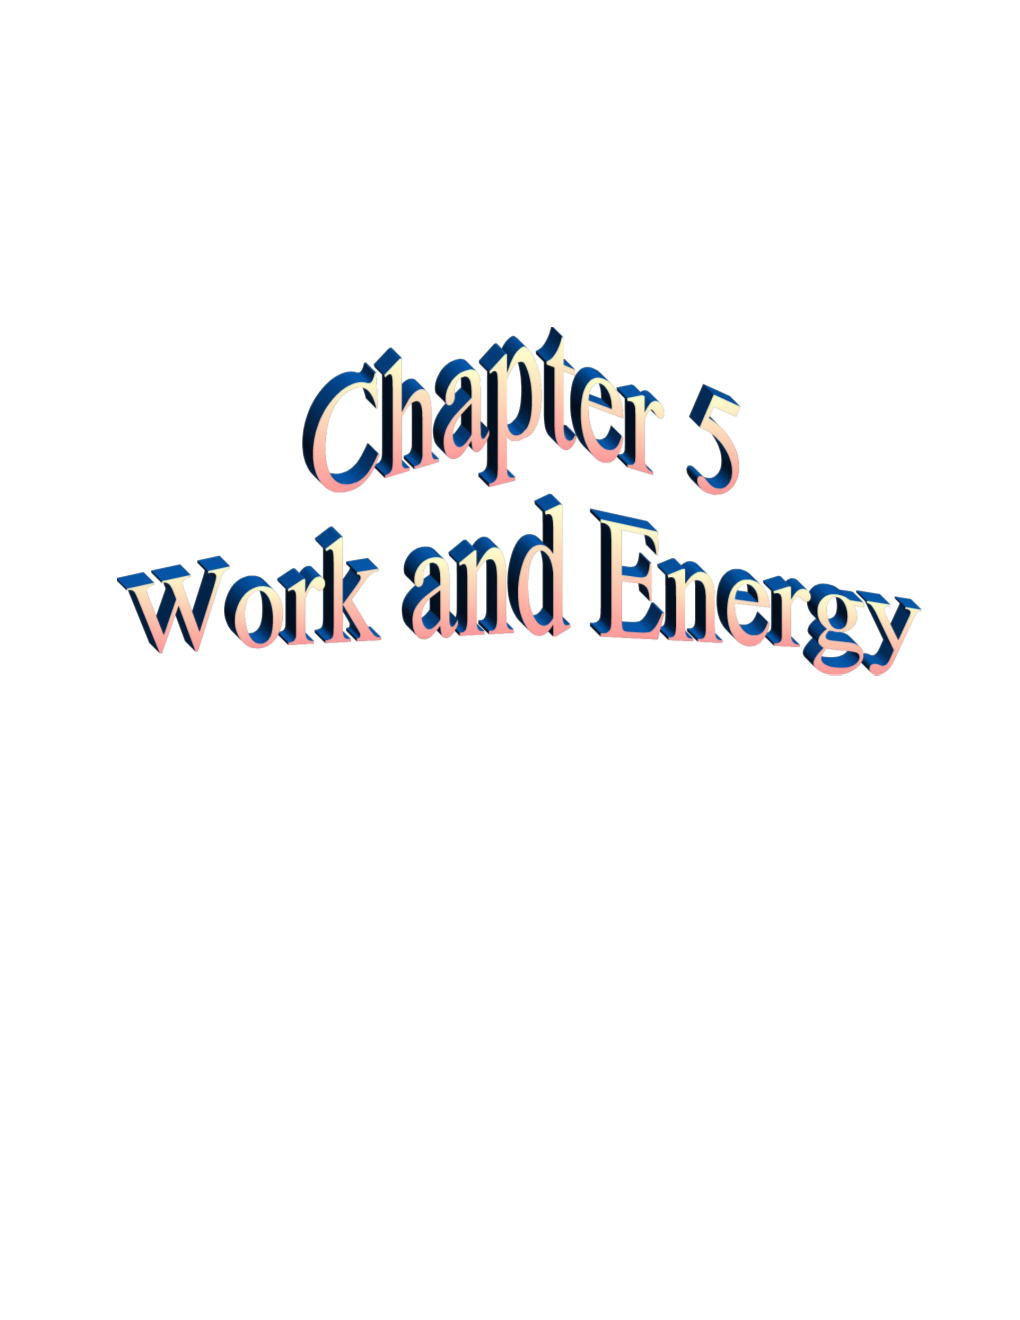 5A1 - Work and Energy